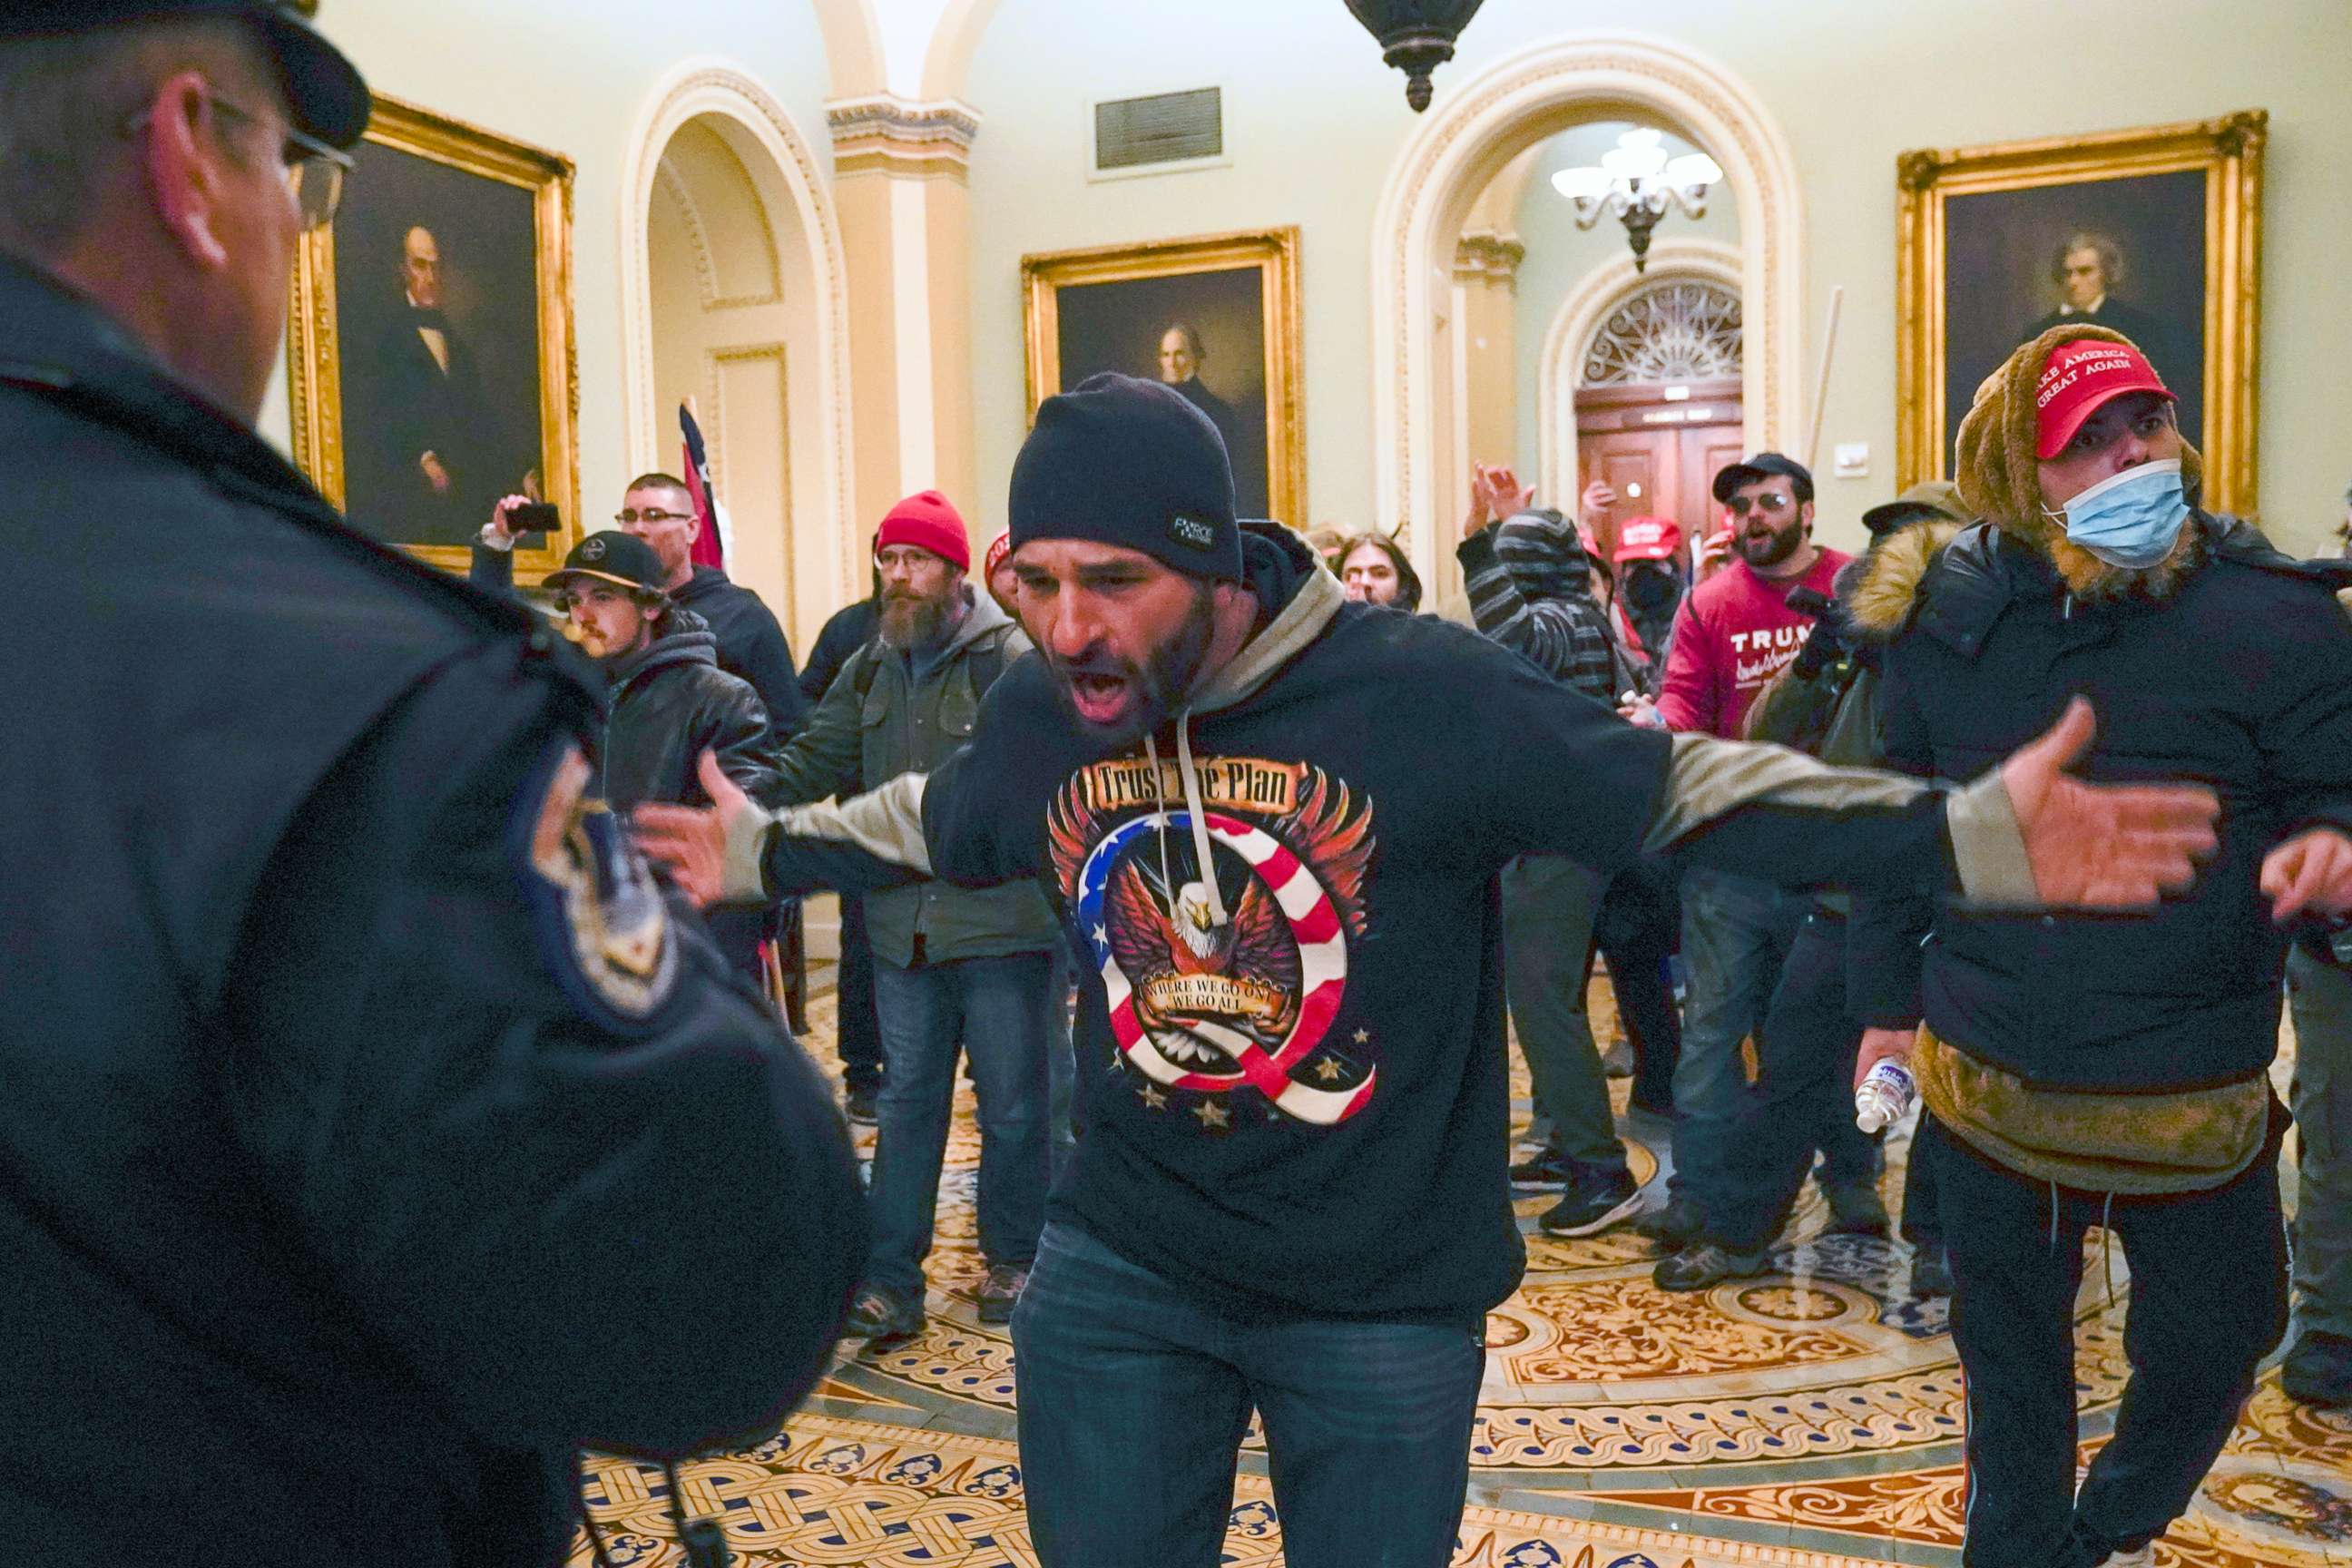 PHOTO: In this Jan. 6, 2021, file photo, Trump supporters, including Doug Jensen, center, confront U.S. Capitol Police in the hallway outside of the Senate chamber at the Capitol in Washington.